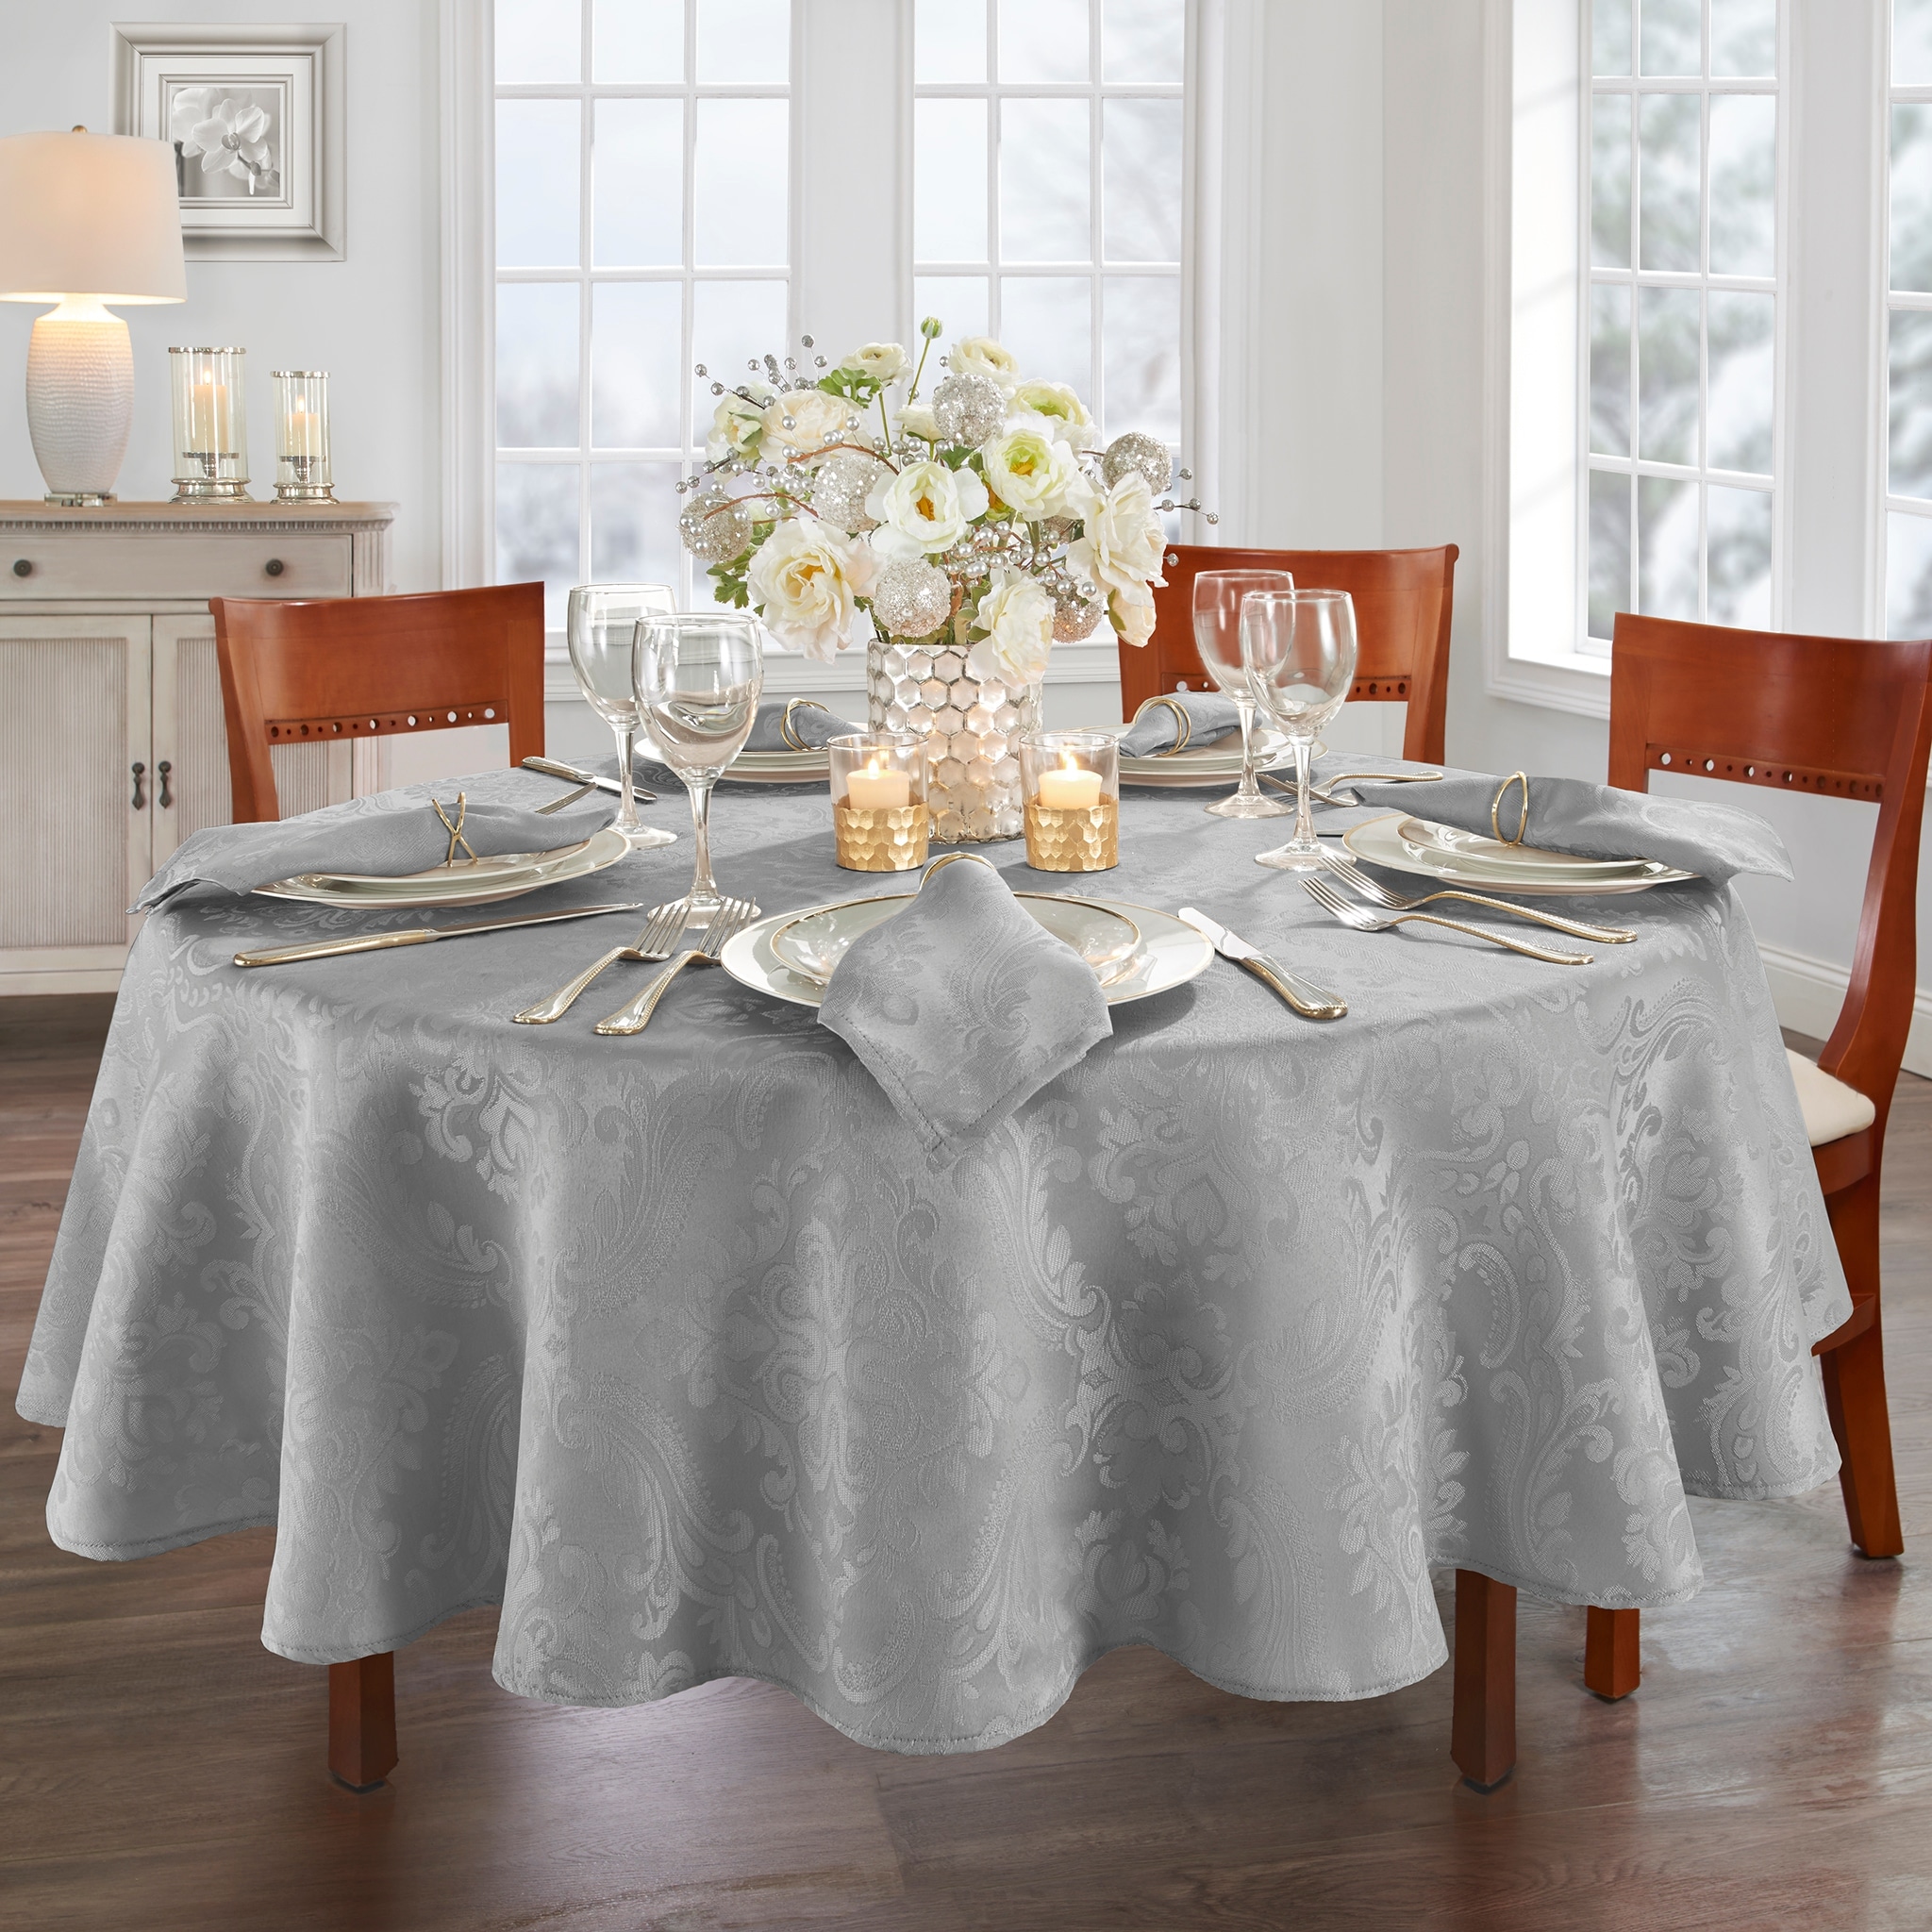 Grey & White Damask Square Centerpiece Tablecloth Topper Runner Mat 